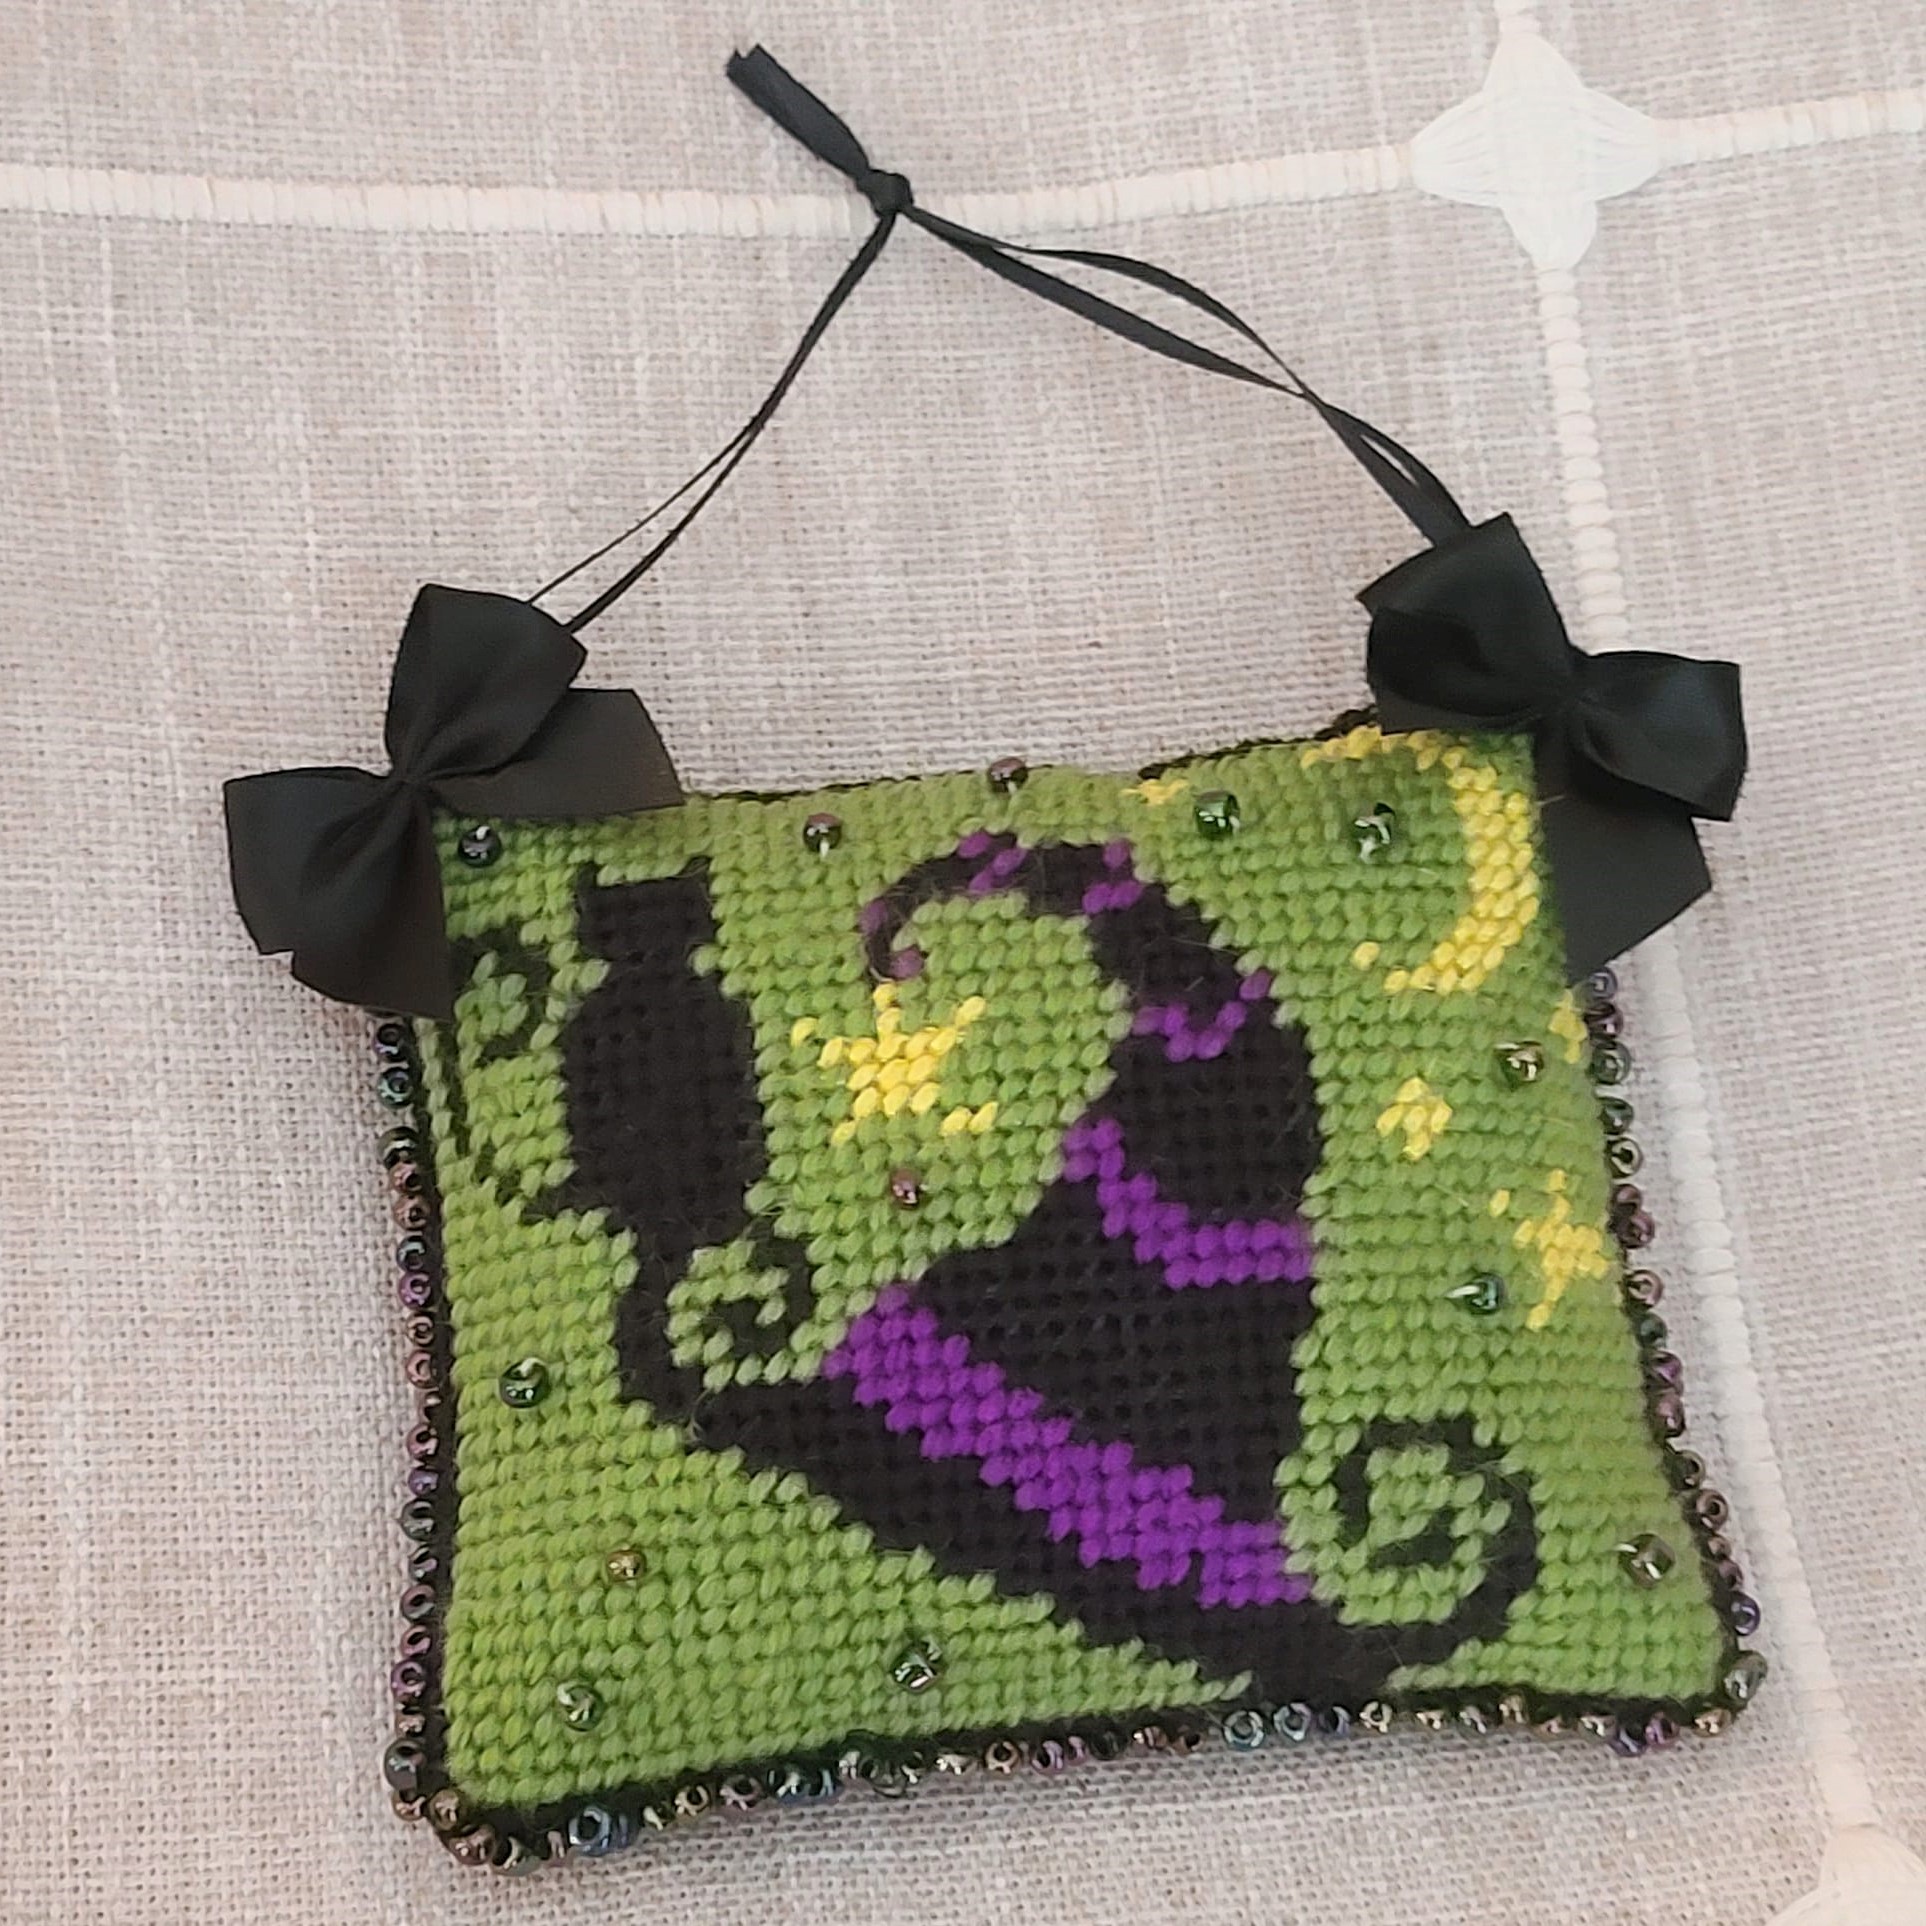 Halloween finished needlepoint ornament with beaded trim